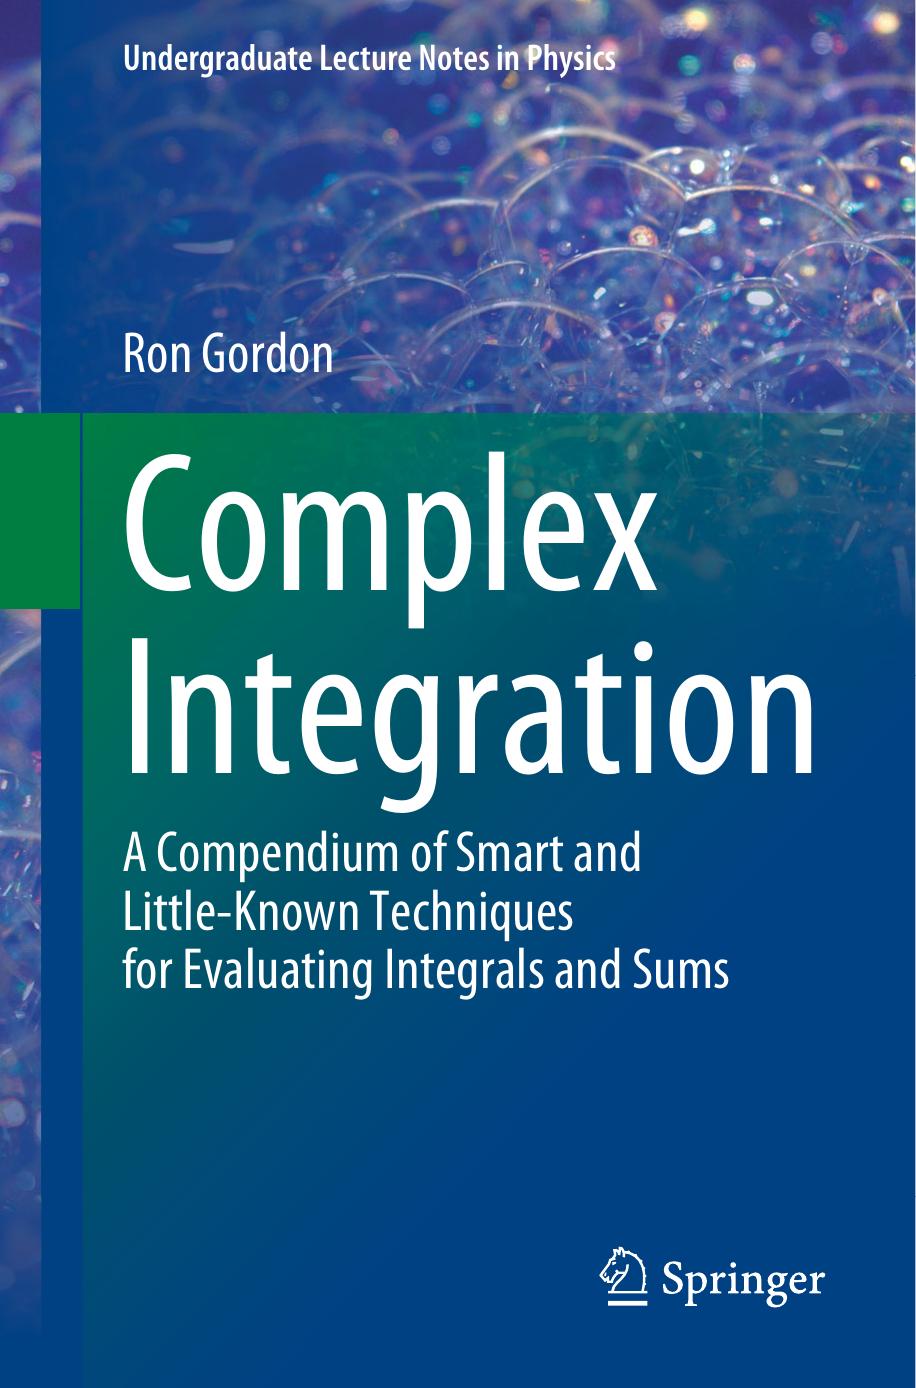 Complex Integration. A Compendium of Smart and Little-Known Techniques for Evaluating Integrals and Sums by Ron Gordon